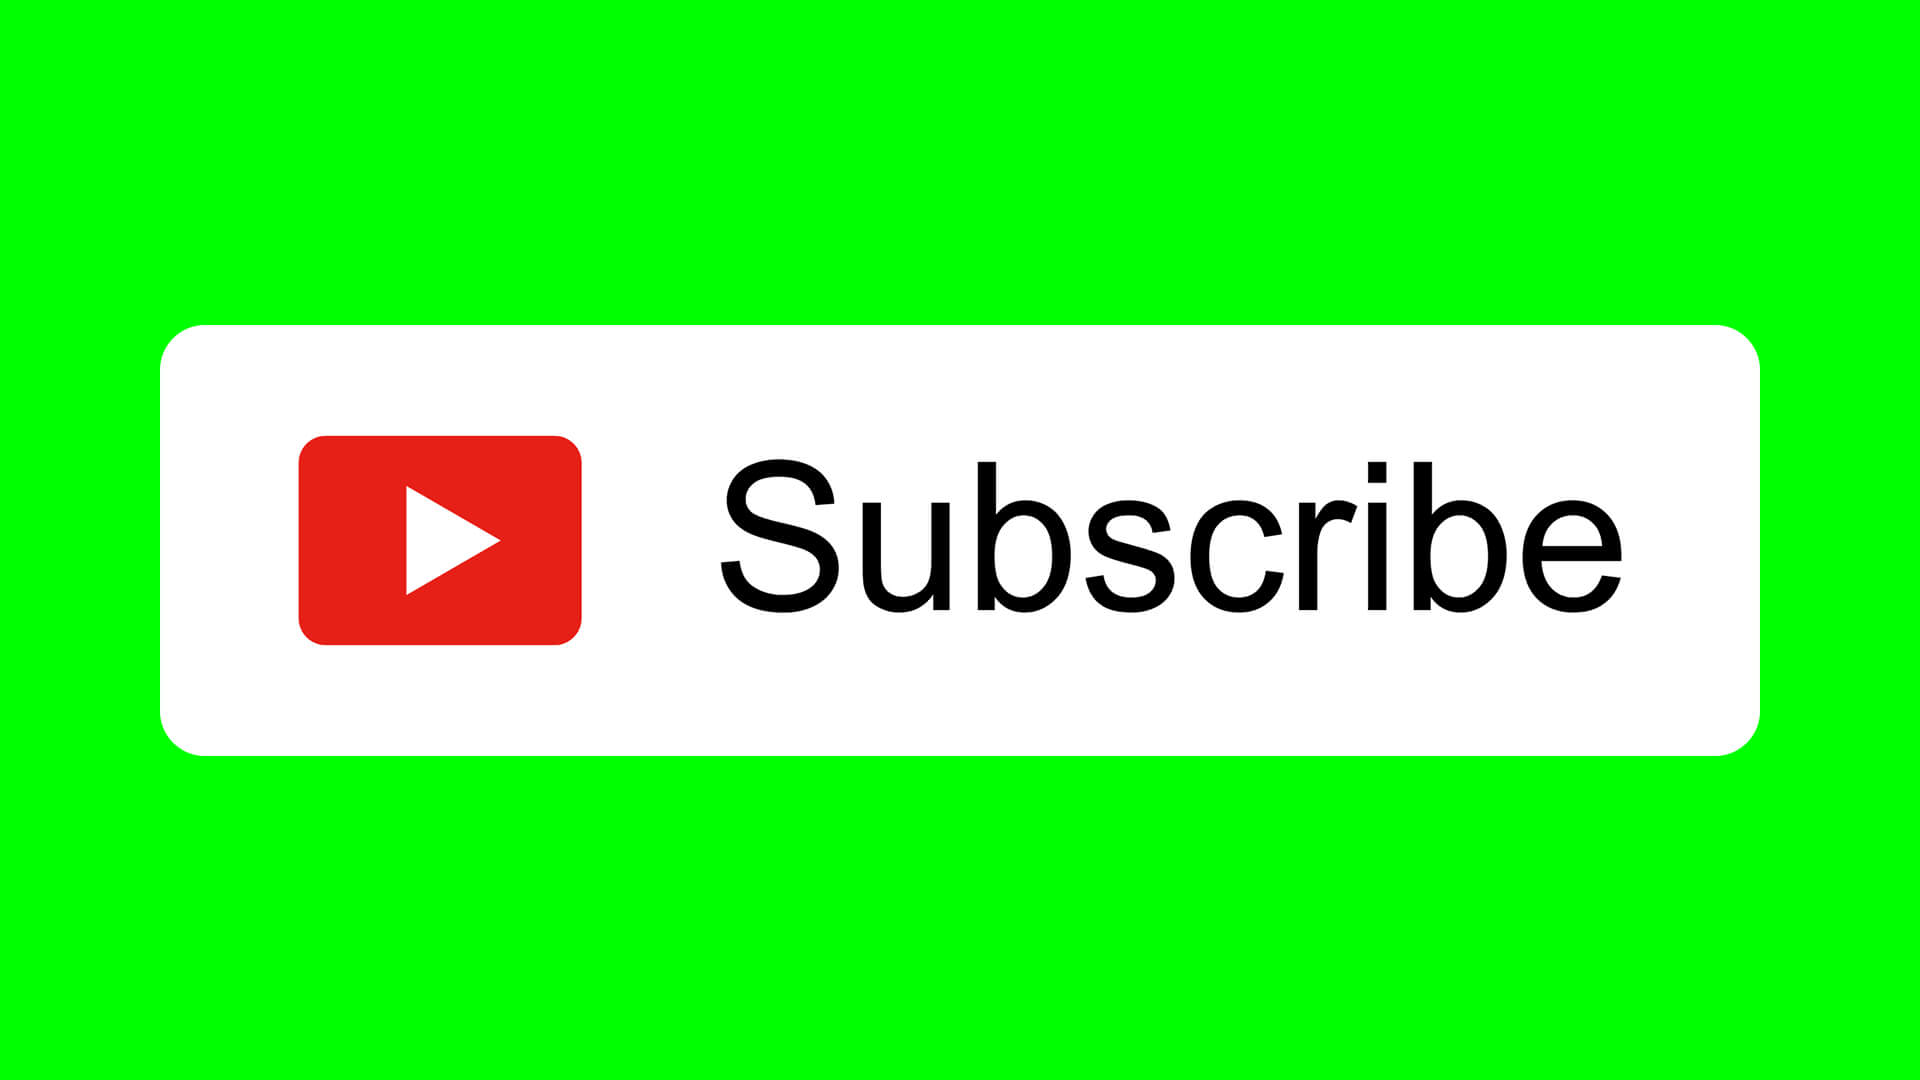 Free YouTube Subscribe Button Download Design Inspiration By AlfredoCreates 11 1